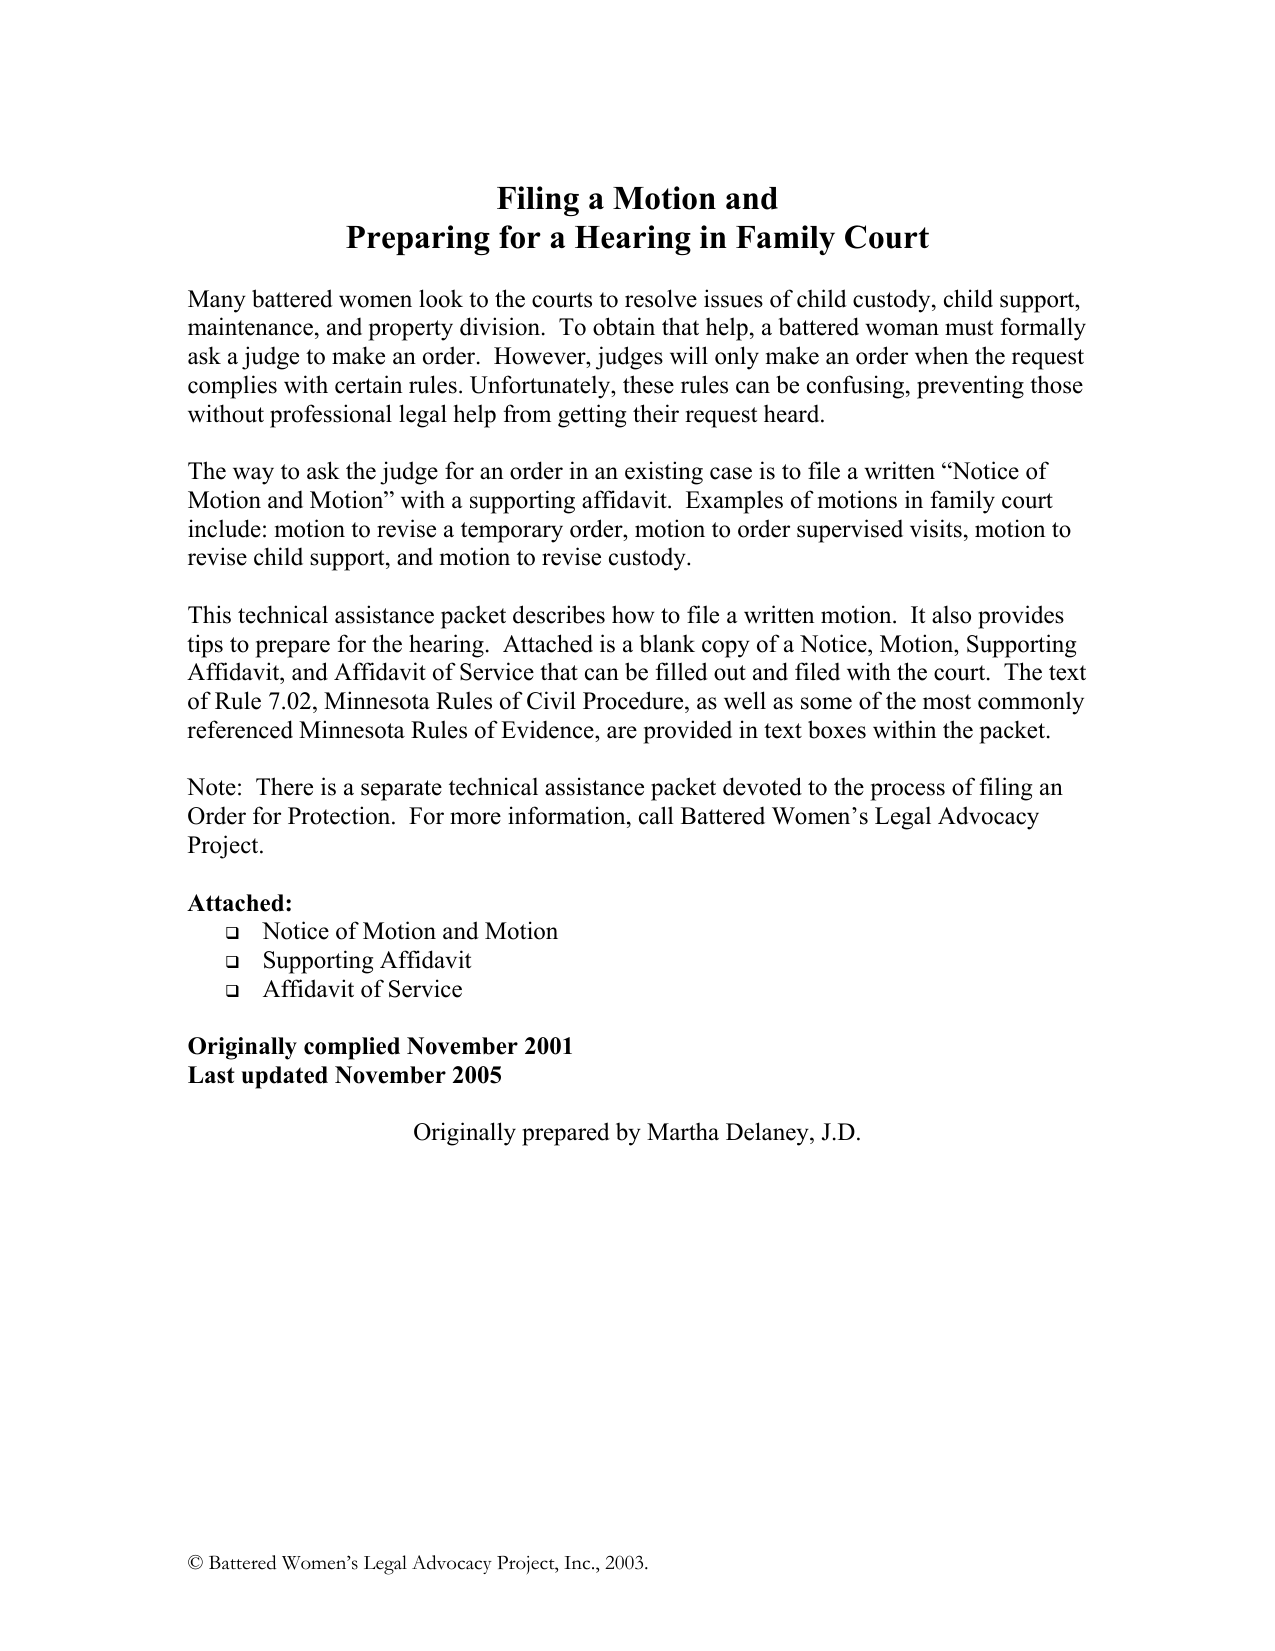 Filing a Motion and Preparing for a Hearing in Family Court